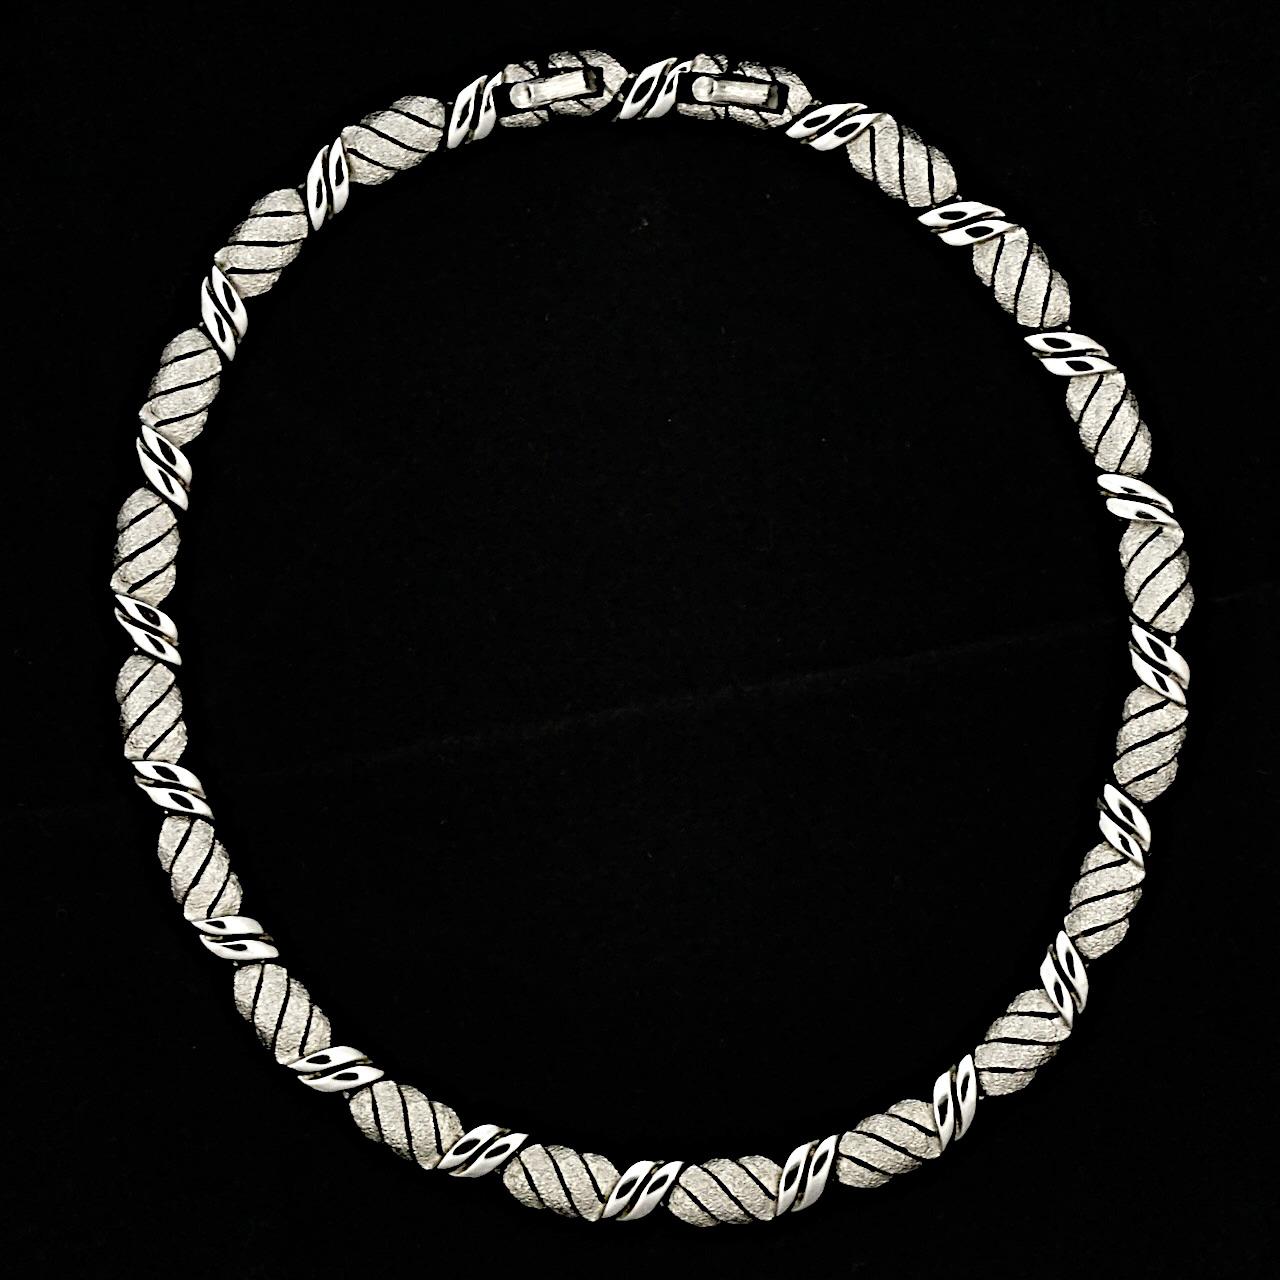 Trifari Silver Plated Brushed and Shiny Link Design Necklace circa 1960s For Sale 3